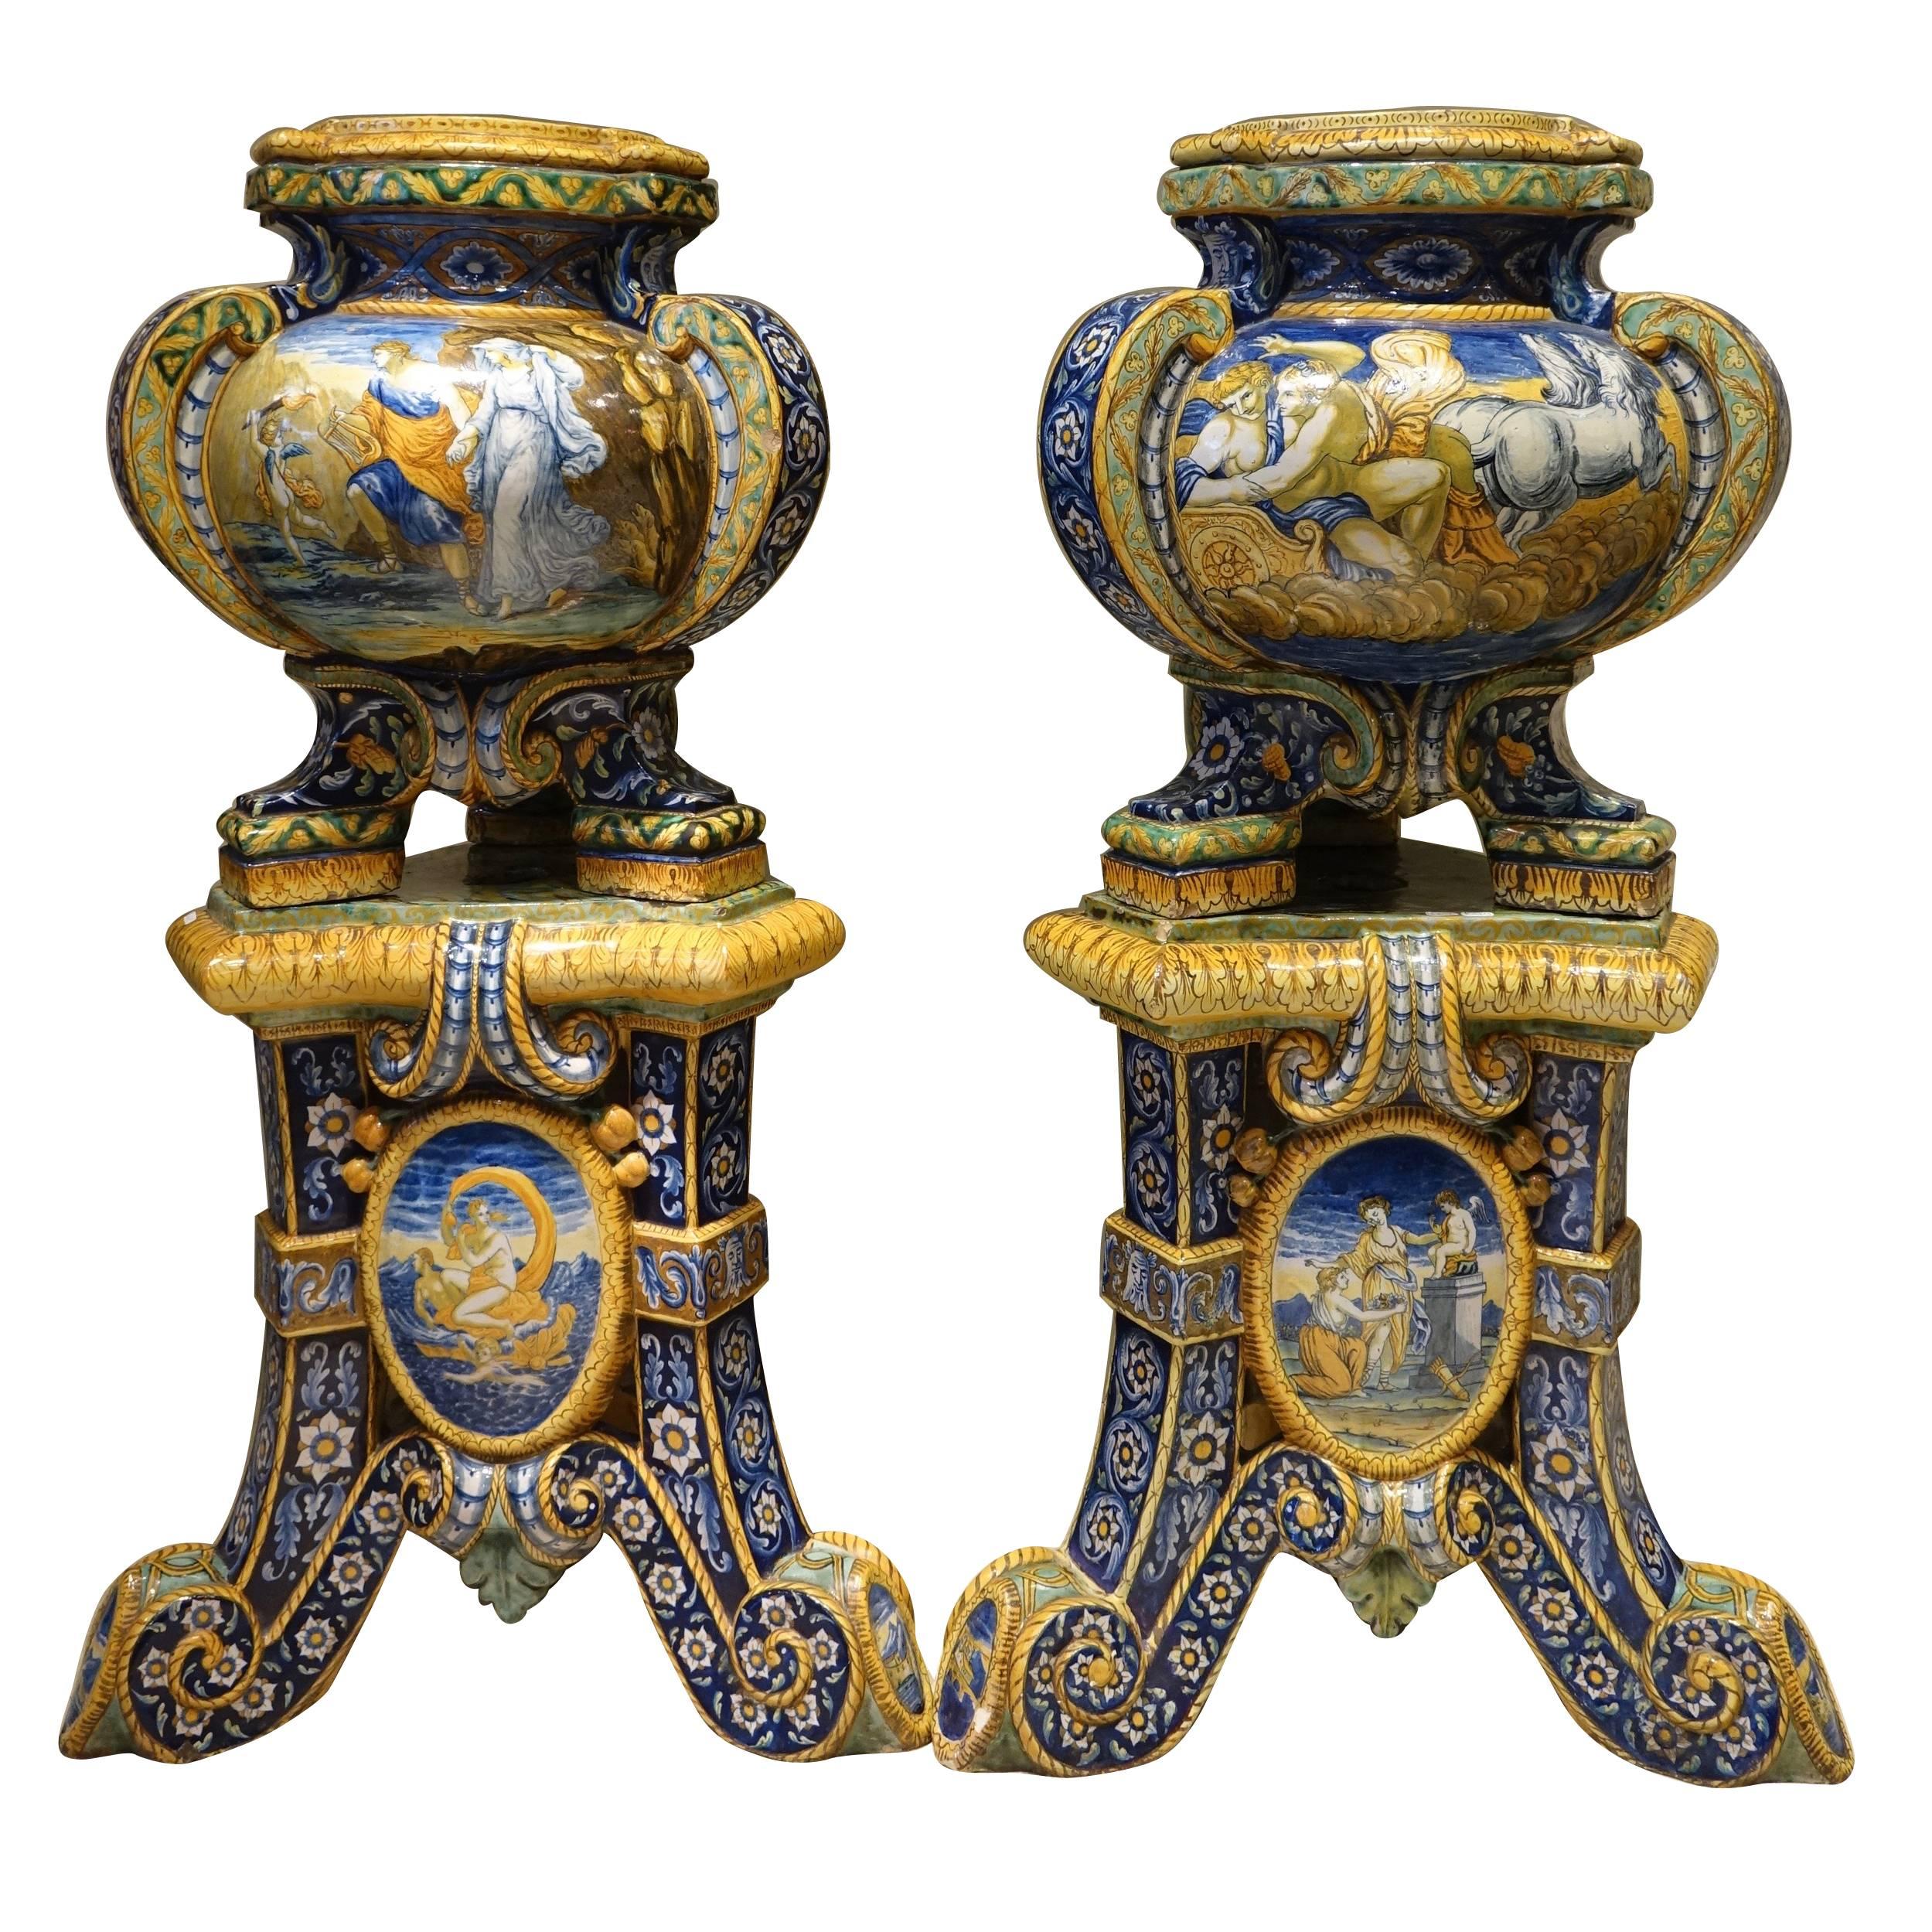 Pair of Gardeners with Their Stand in Faience, Urbino Workshop, Italy